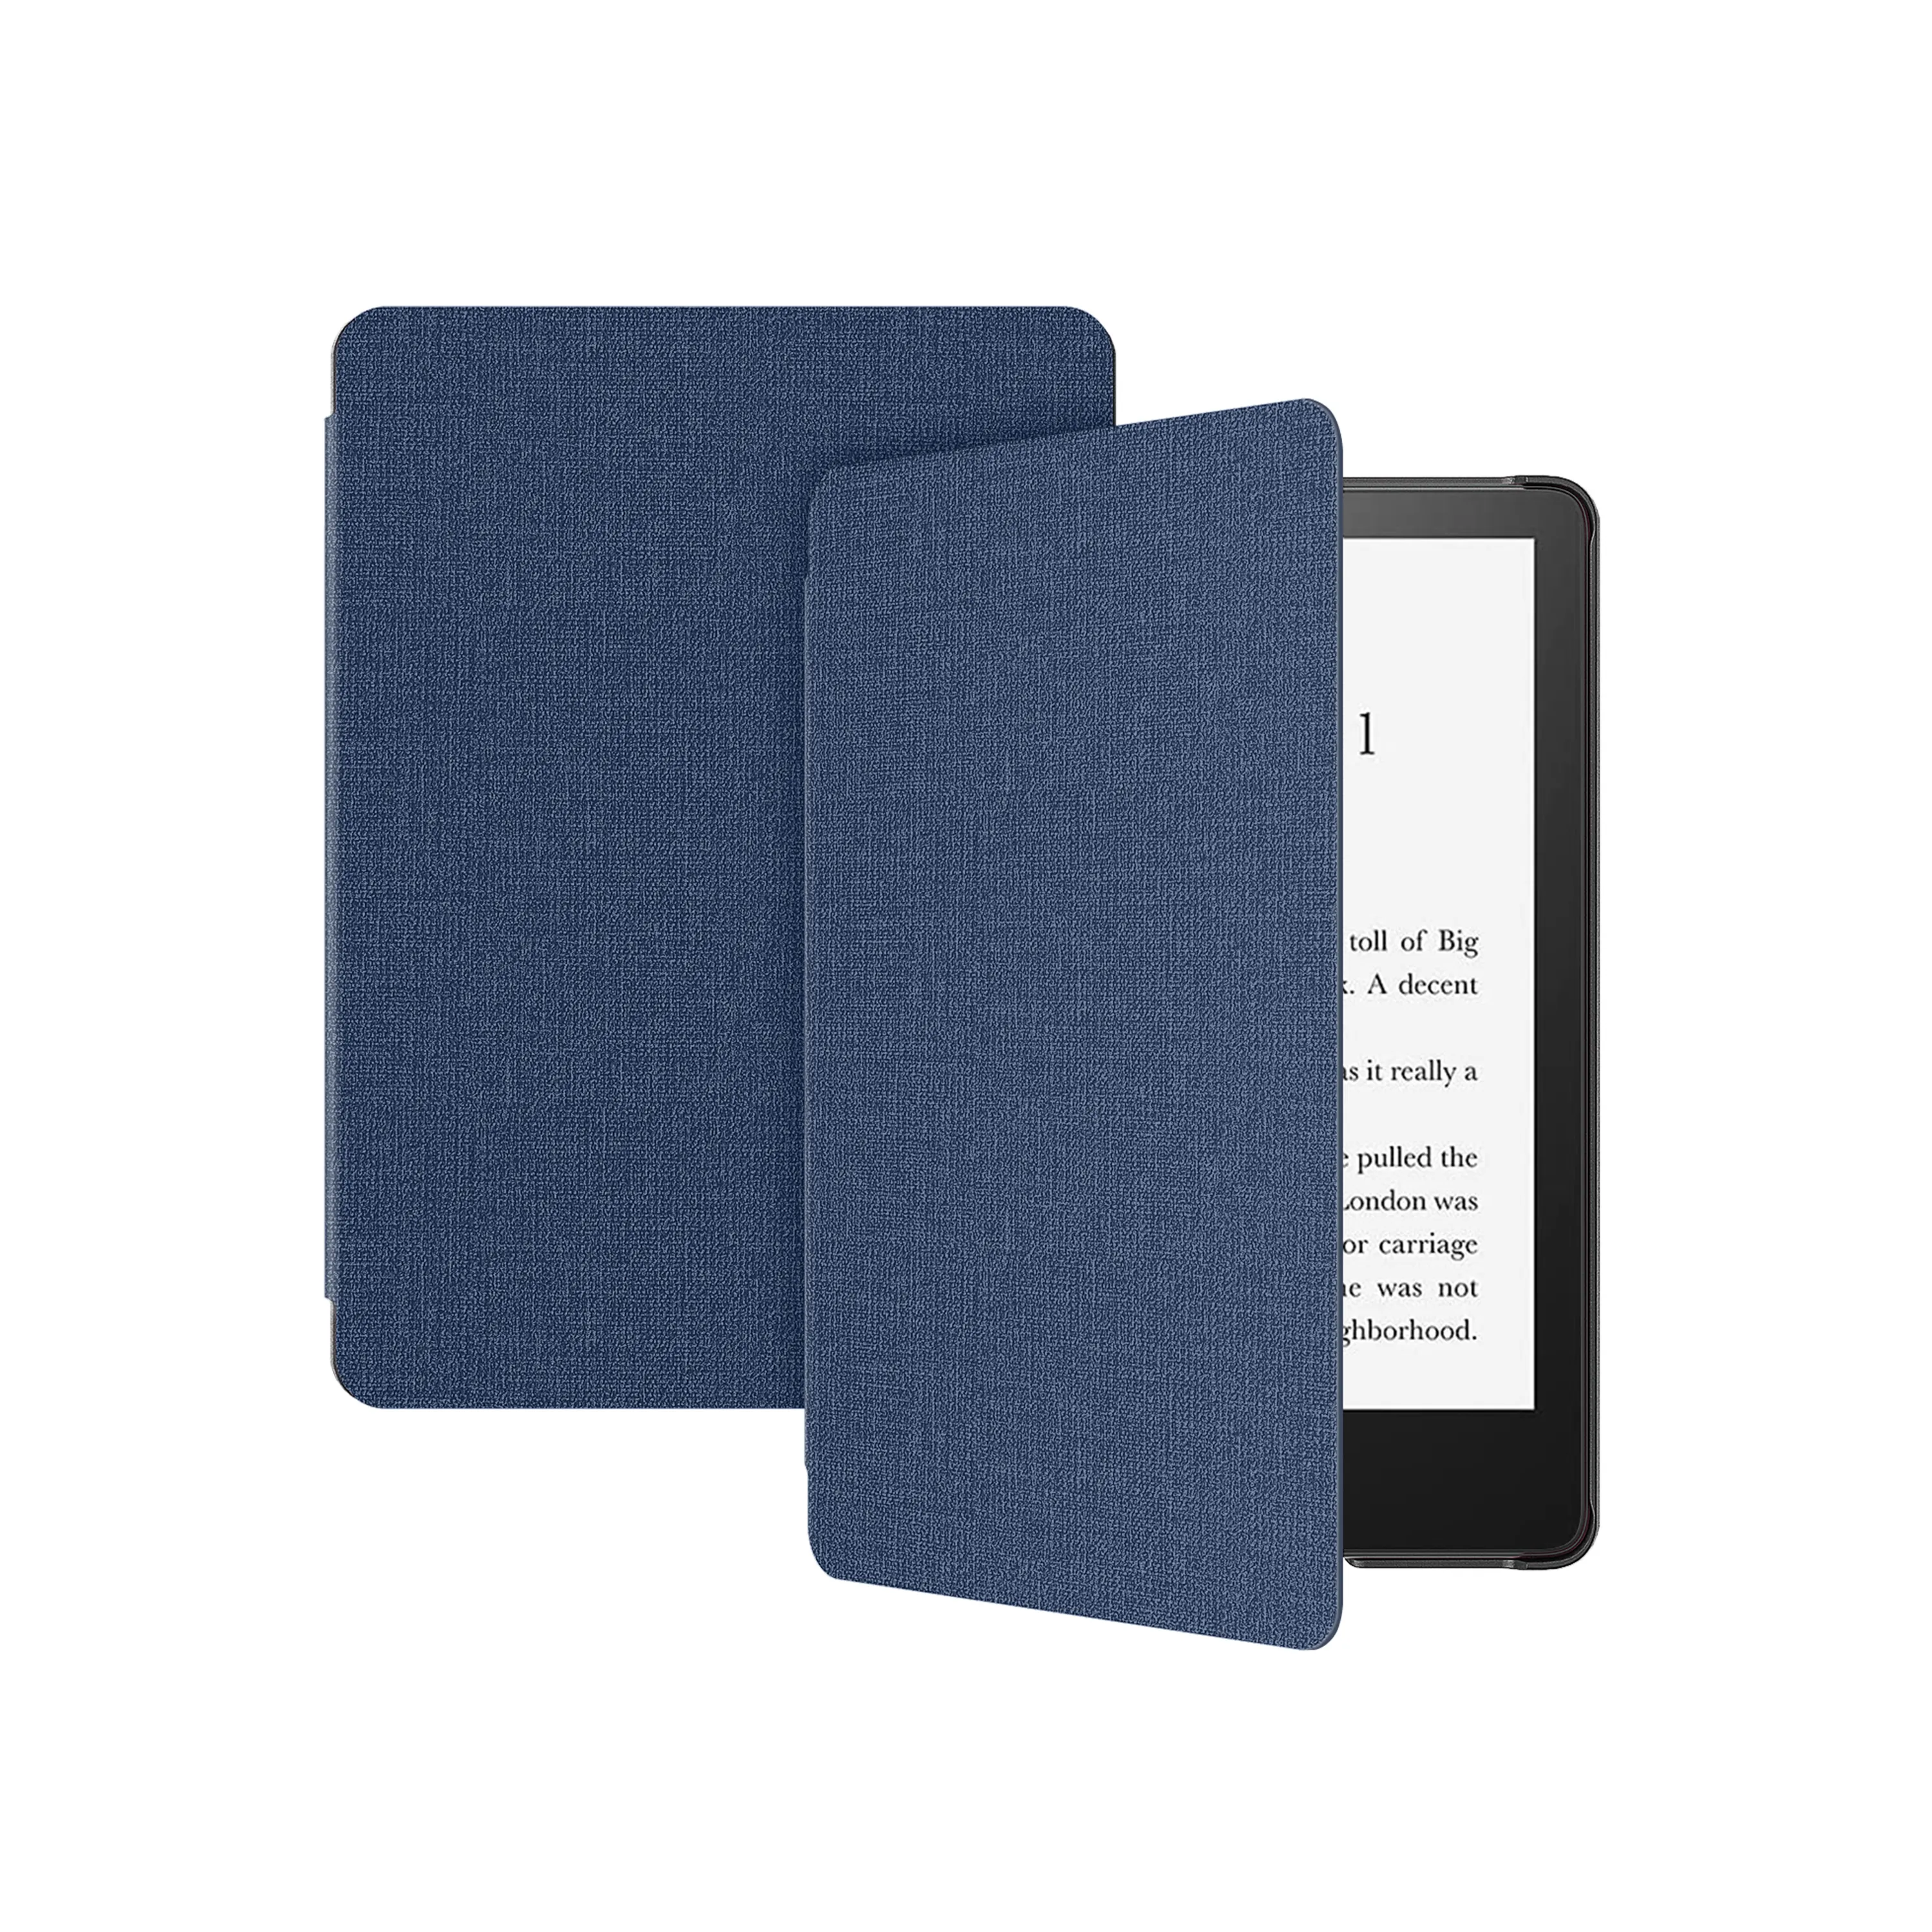 New fashion for kindle paperwhite coverkindle 10. generation coverkindle 10 case